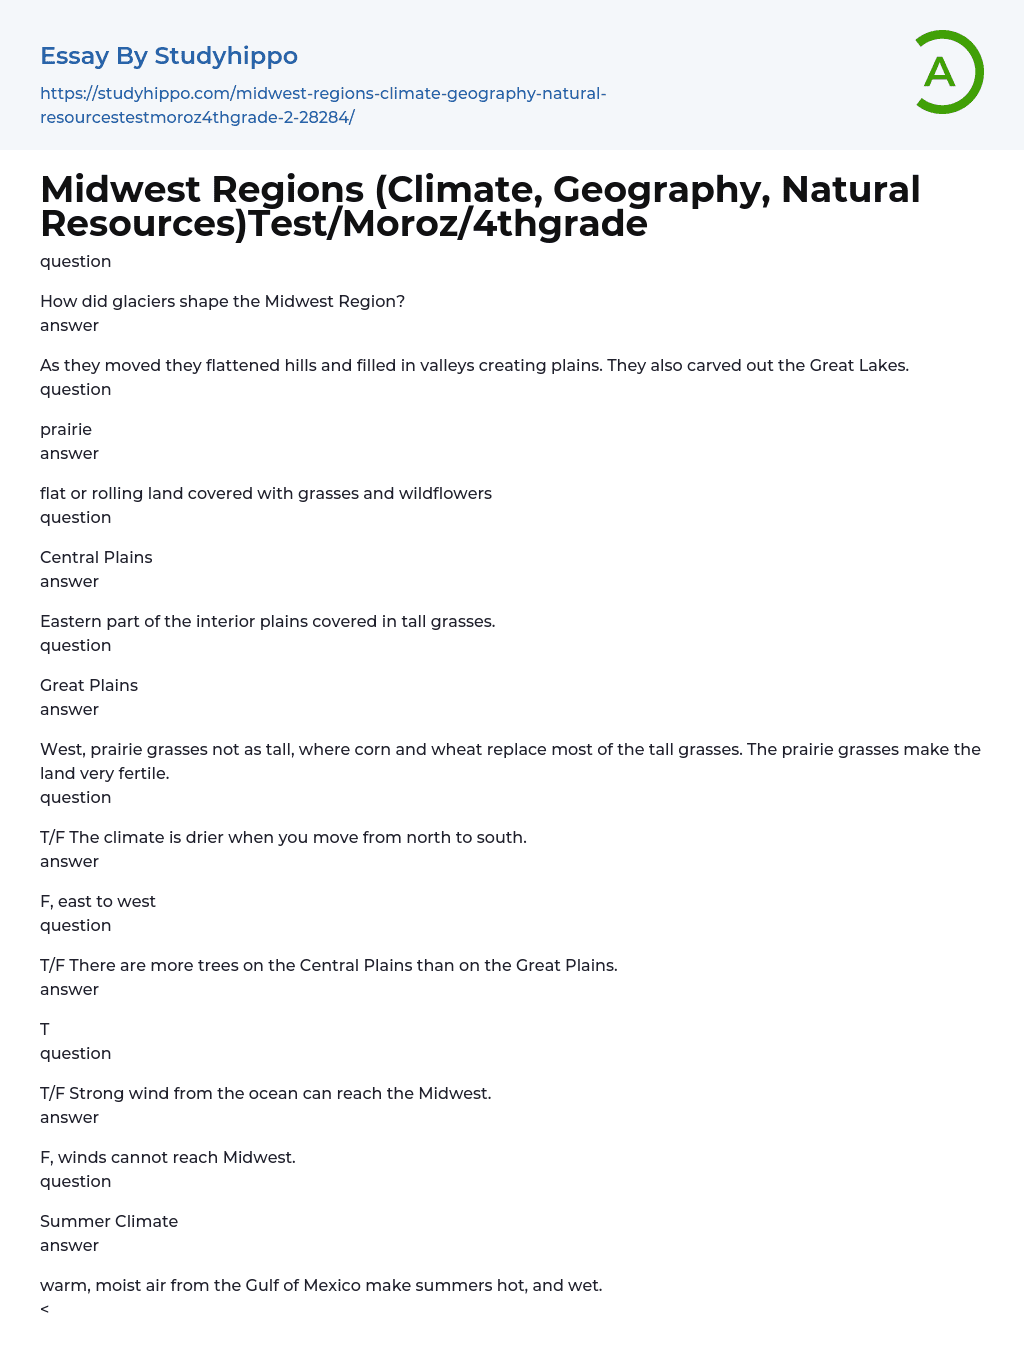 Midwest Regions (Climate, Geography, Natural Resources)Test/Moroz/4thgrade Essay Example